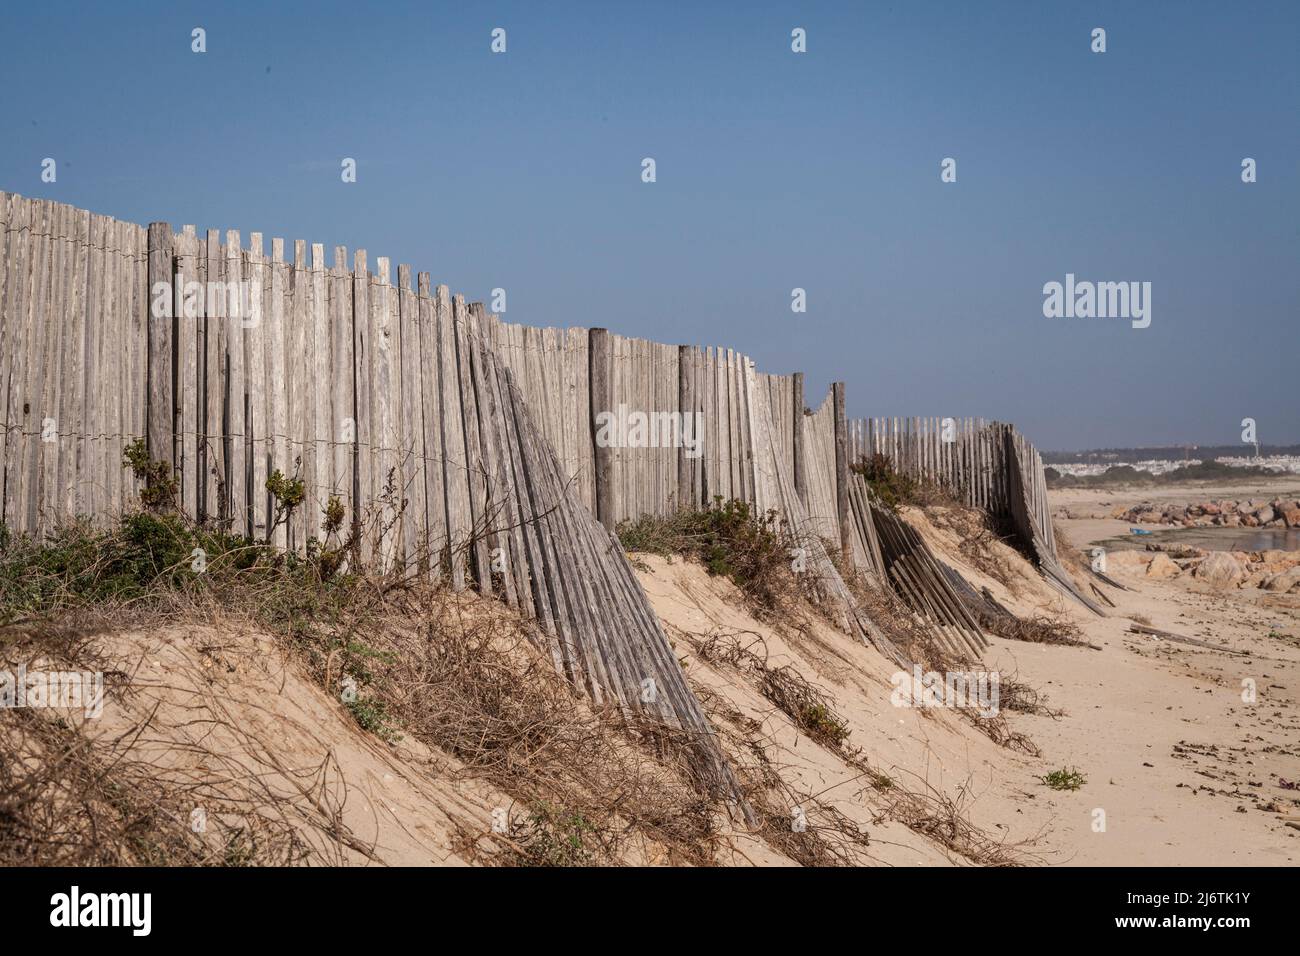 a broken wooden fence on a little island in the Natural reserve of Ria Farmosa near Tavira, Portugal at the Algarve Stock Photo